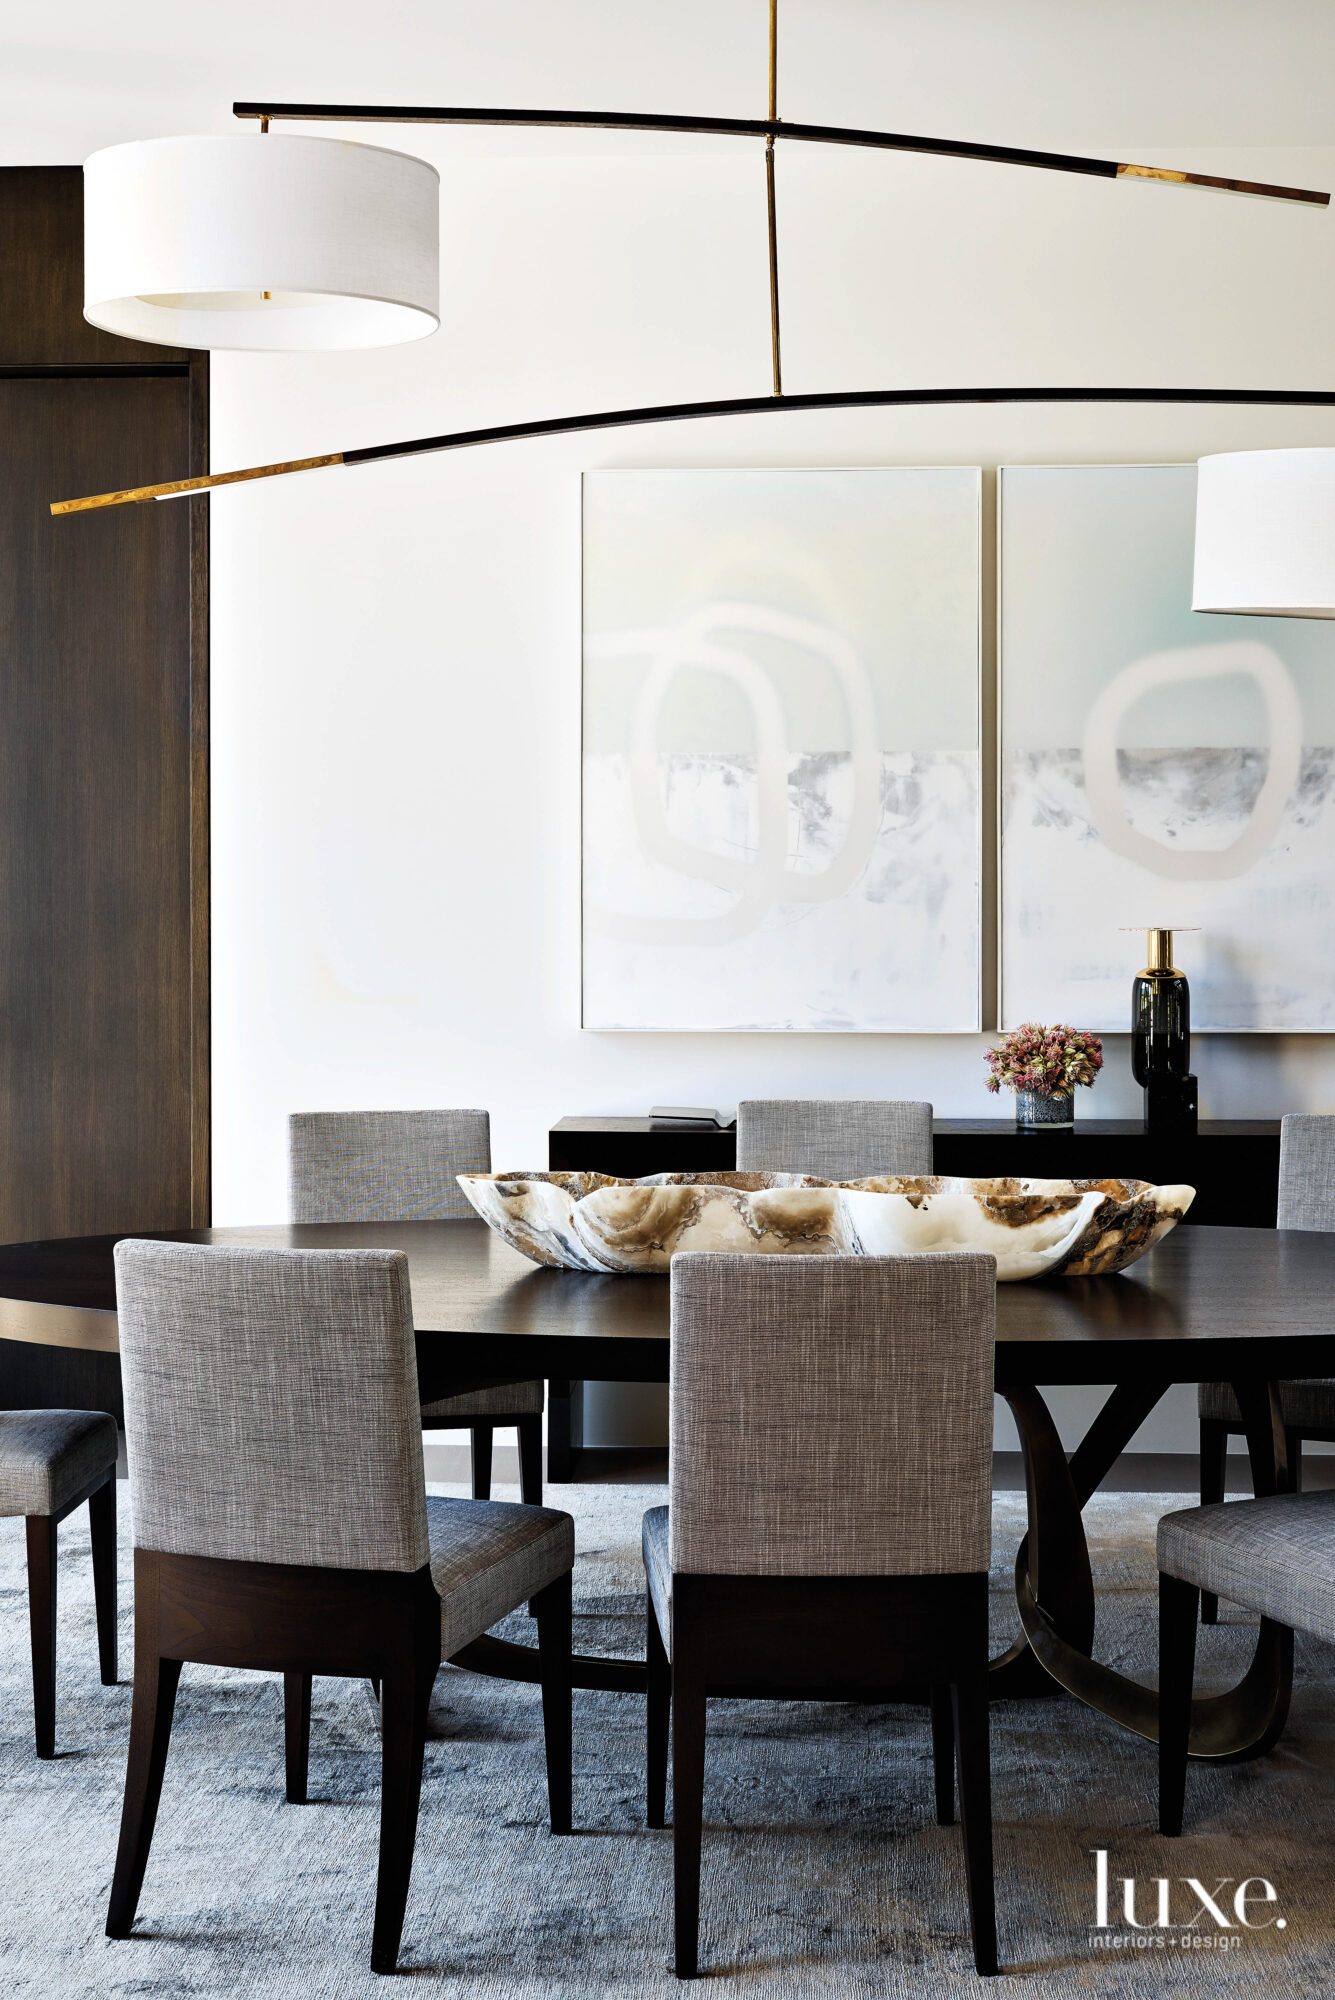 In the dining room, a large, sculptural light fixture hangs over a table and zebra print chairs.